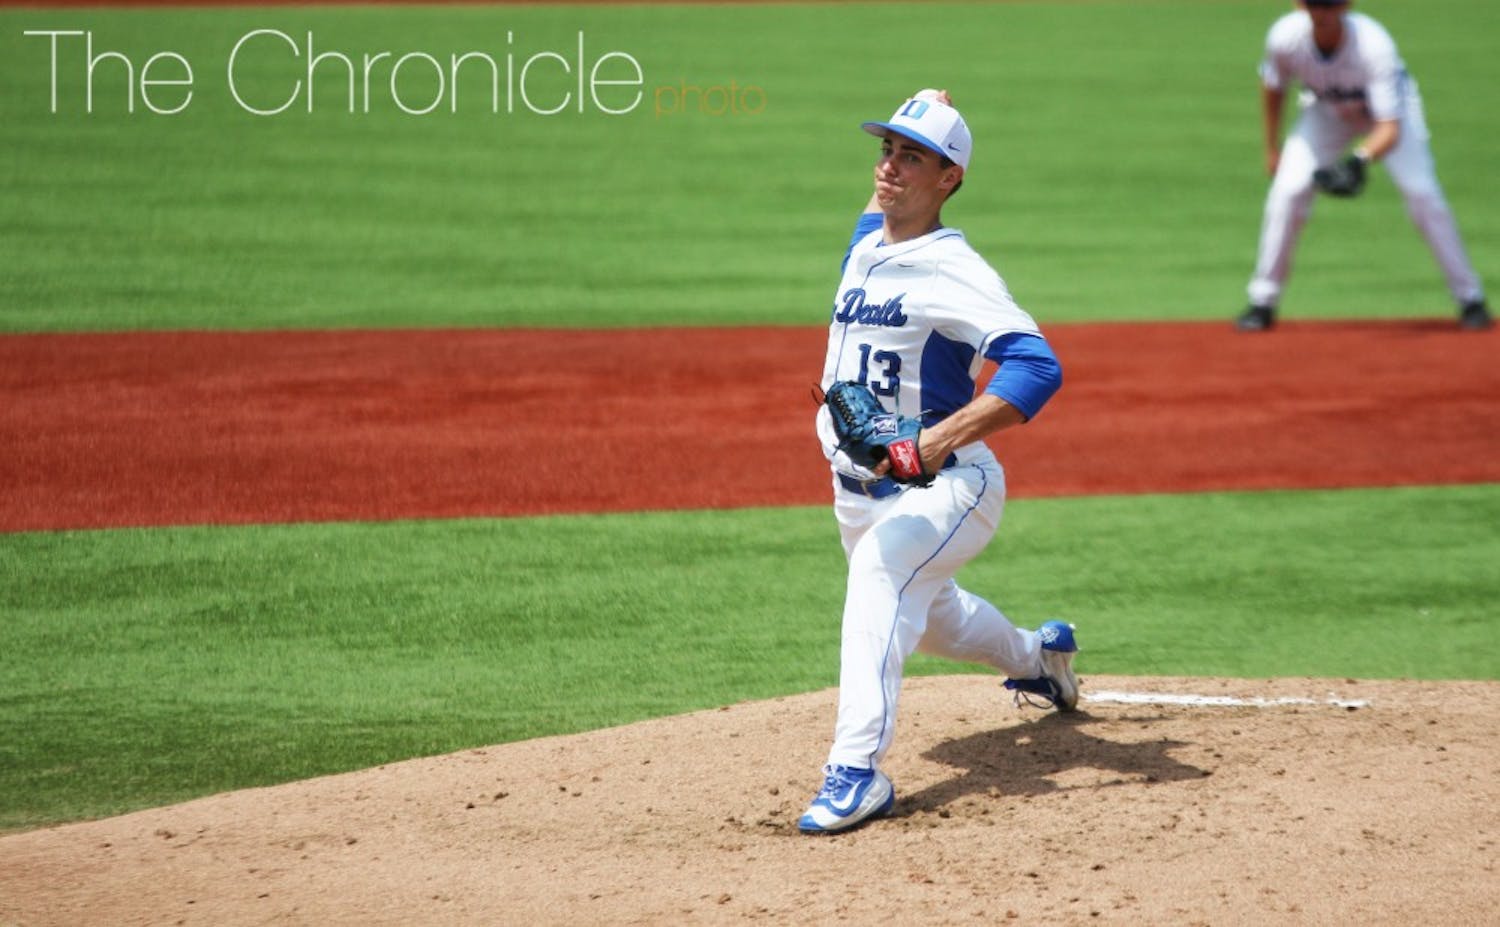 Ryan Day surrendered just two runs in a career-high eight innings Saturday, but the Blue Devil offense did not give him enough support for a win.